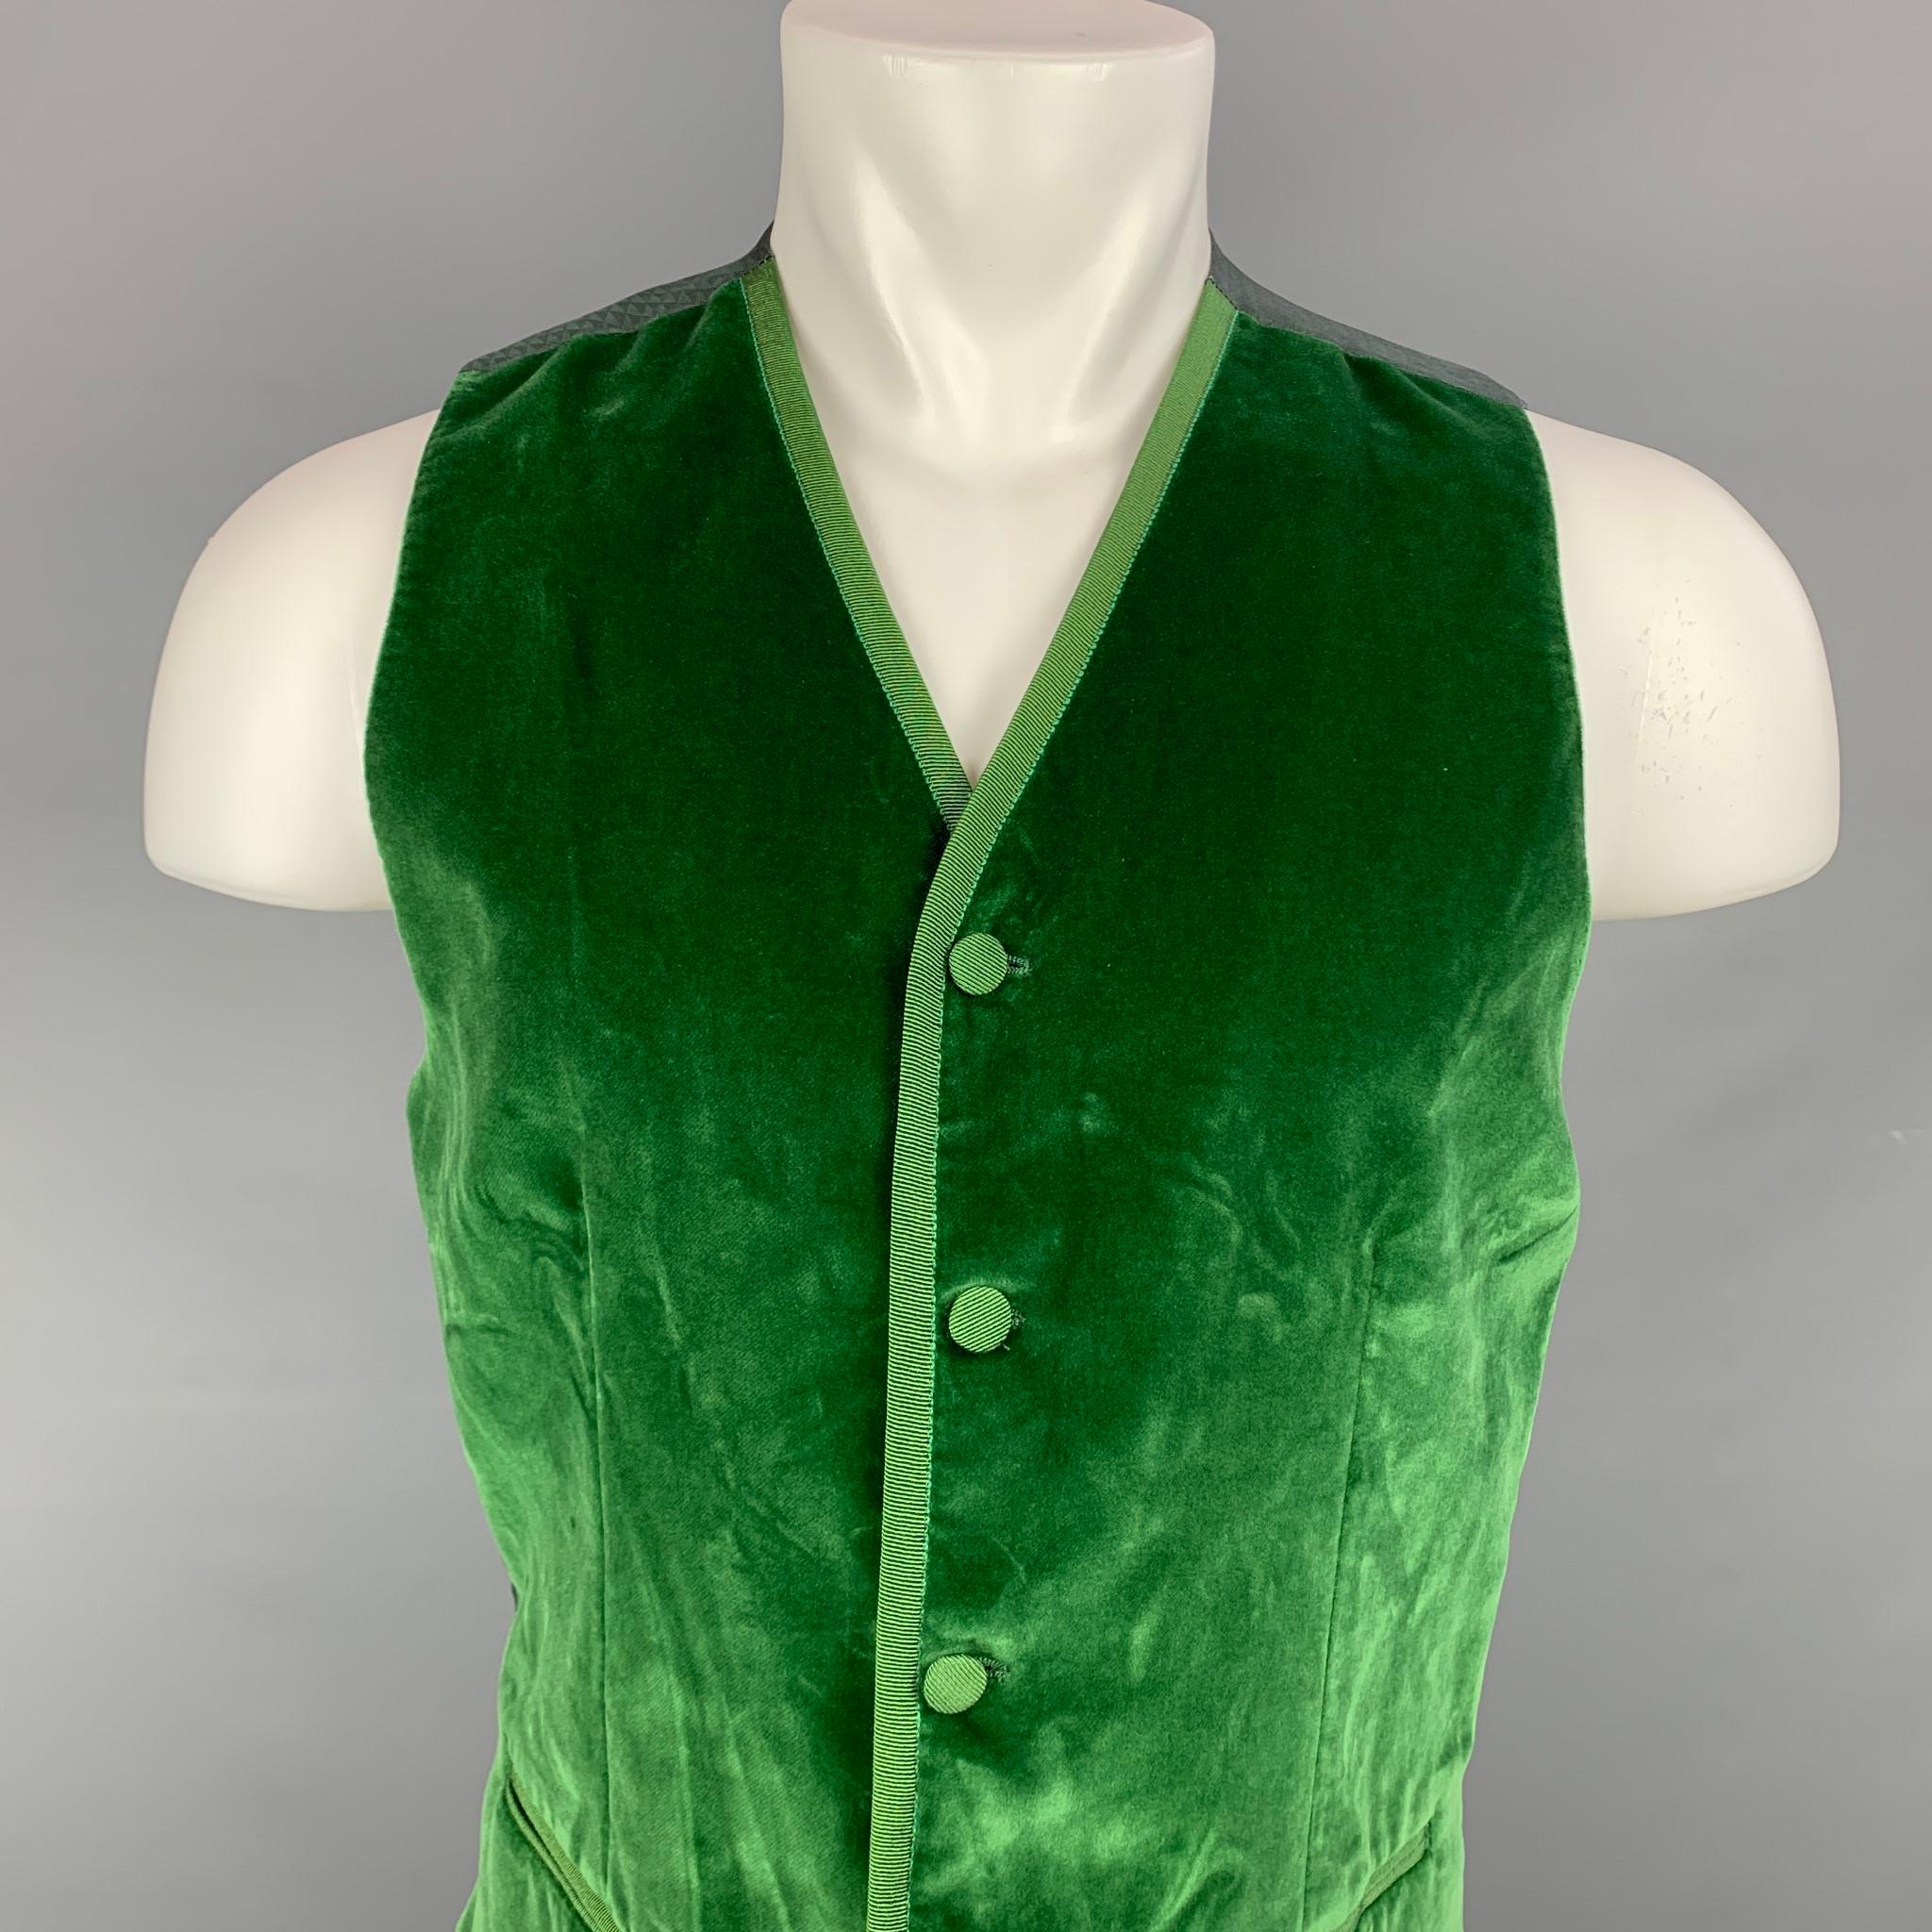 DOLCE & GABBANA vest comes in a green velvet featuring a back belt, slit pockets, and a covered buttoned closure. Made in Italy.

Very Good Pre-Owned Condition.
Marked: IT 48

Measurements:

Shoulder: 13.5 in.
Chest: 38 in.
Length: 23.5 in. 